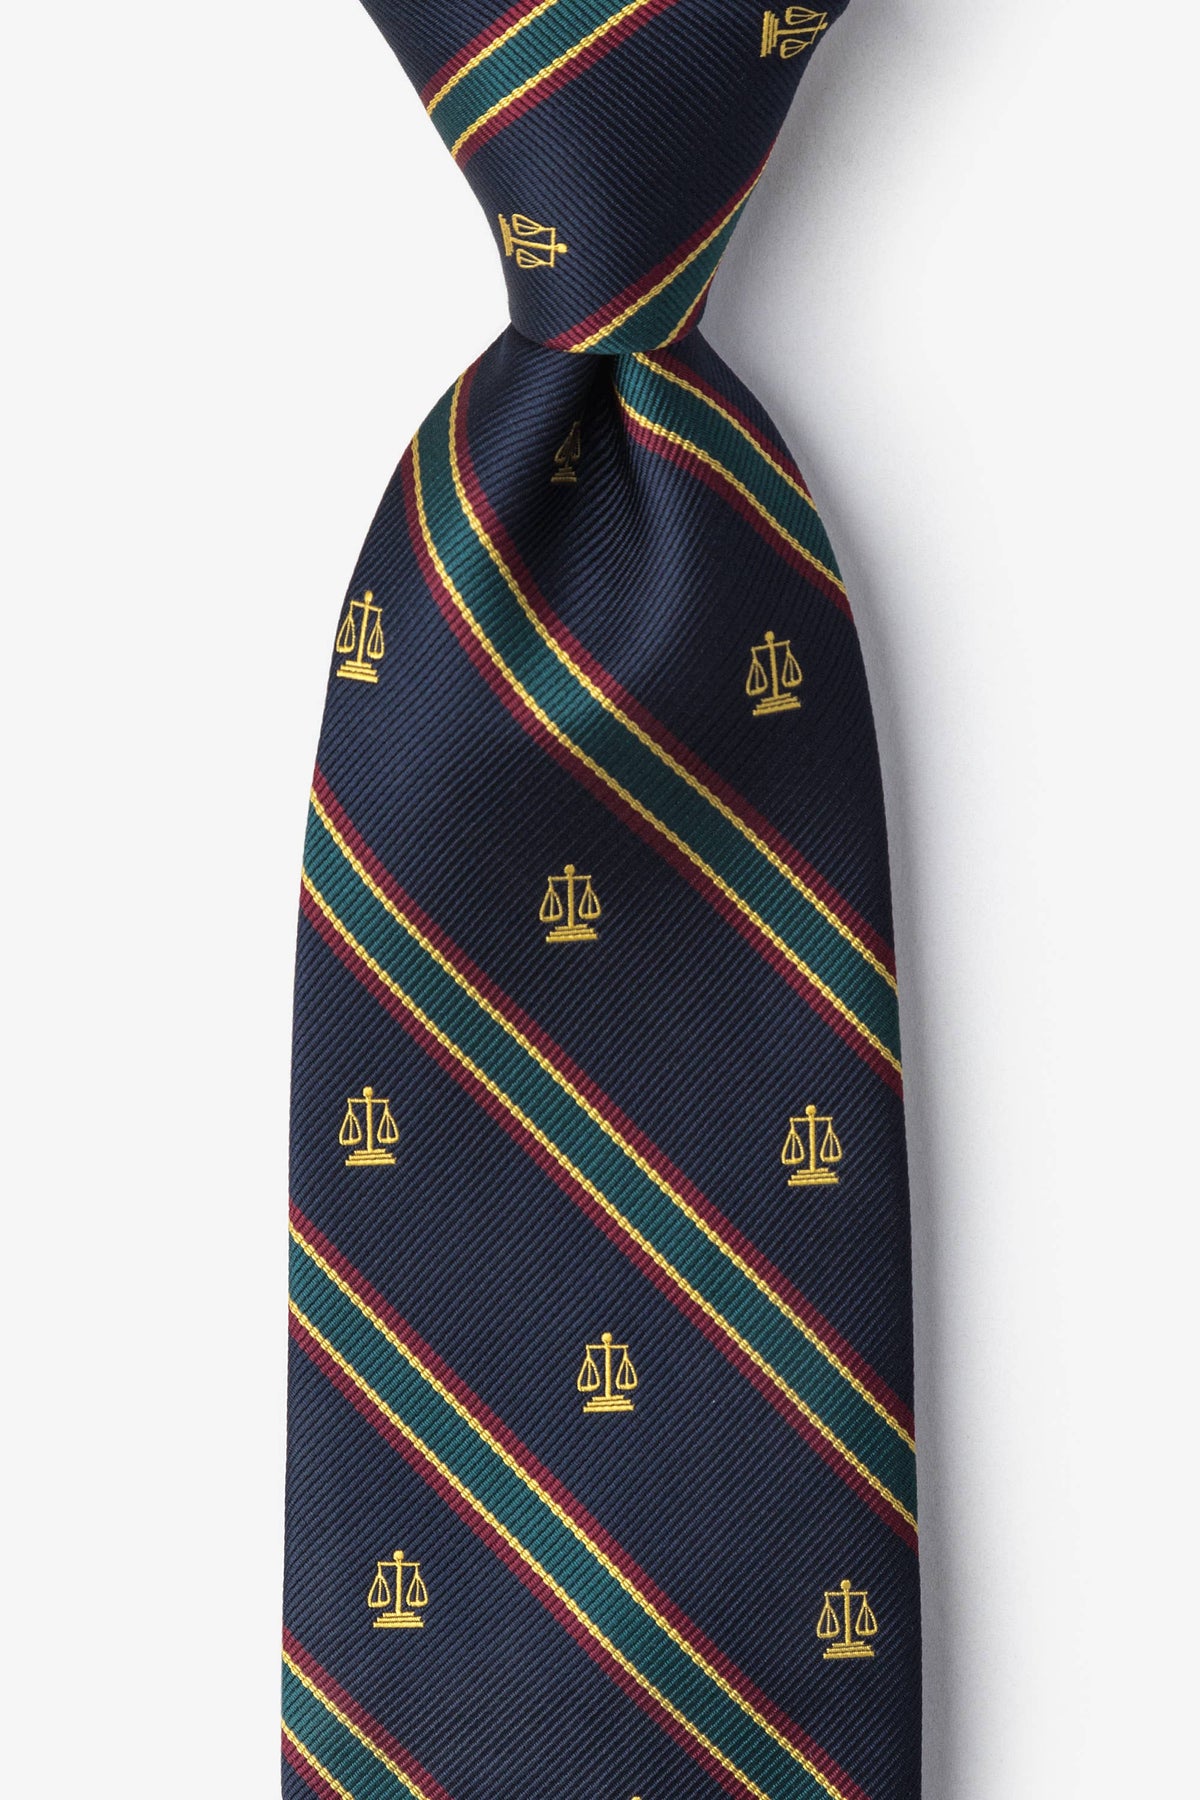 Scales of justice Legal Law Lawyer necktie by WildTies